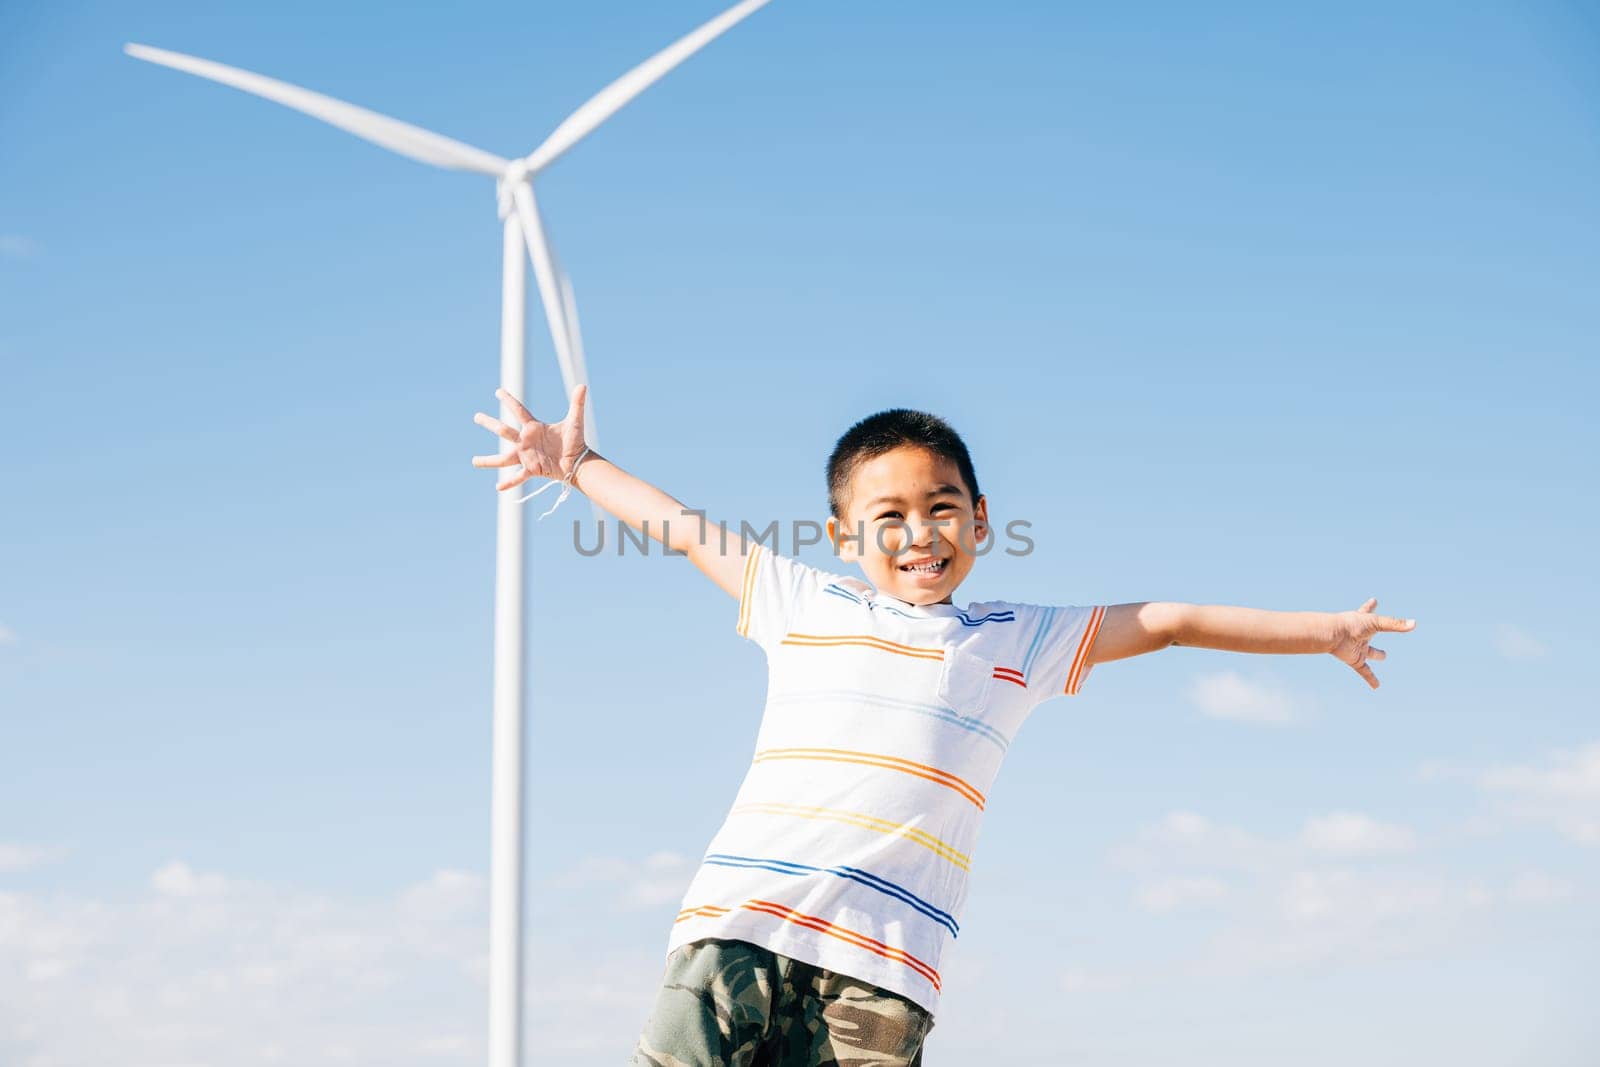 A portrait of a happy boy amidst a wind farm. Joyful family time in nature's embrace embracing clean energy and playful moments near windmills. Smiling child enjoying nature's escape.